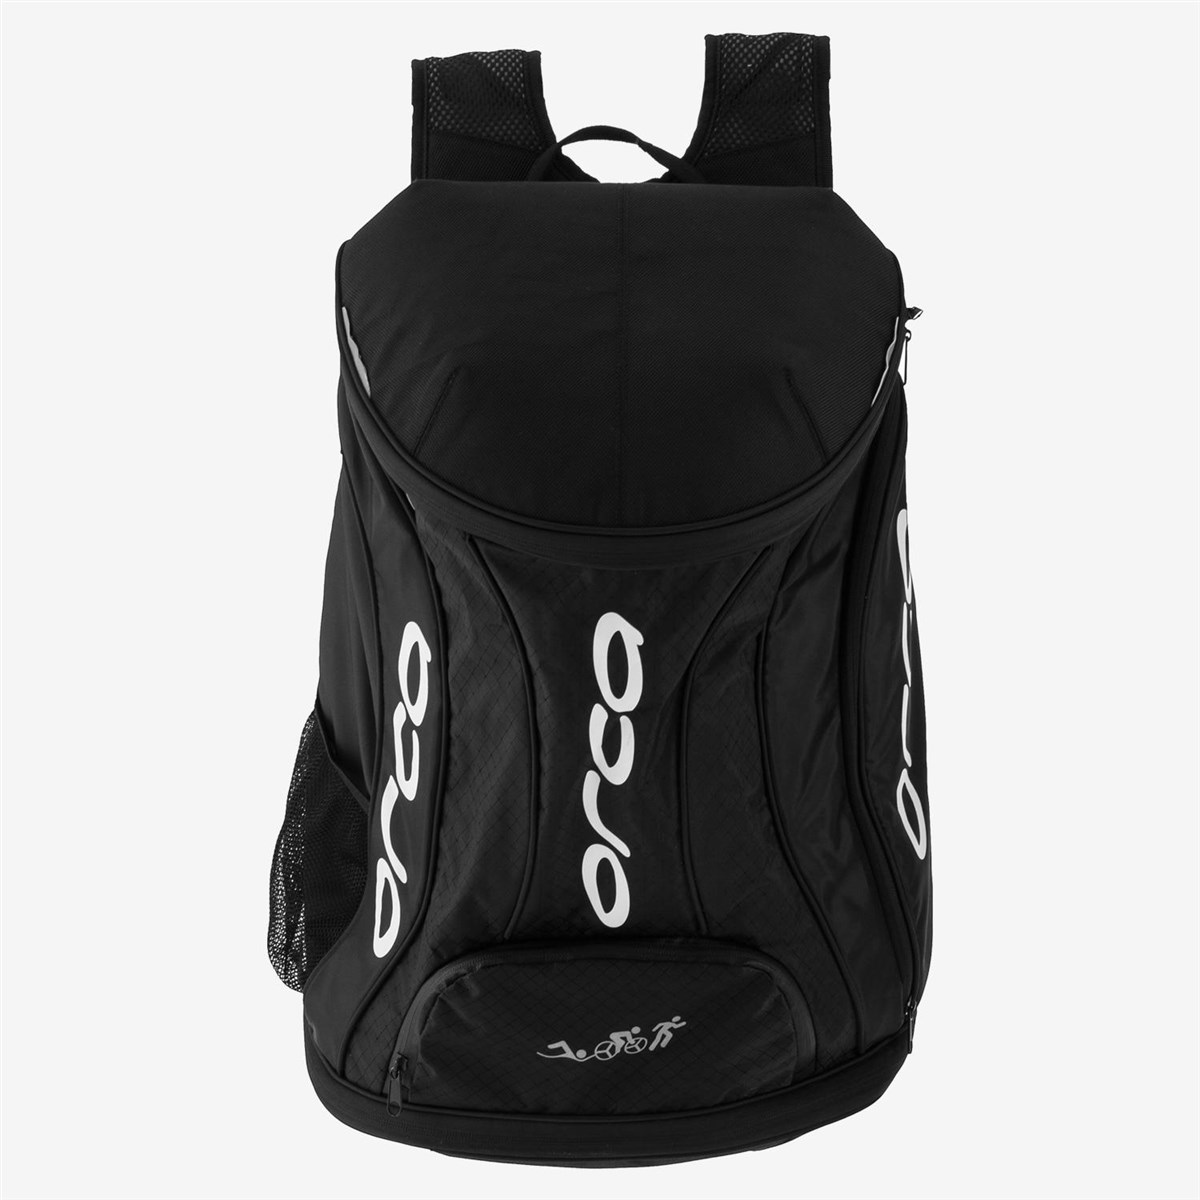 Orca Transition Triathlon Backpack product image